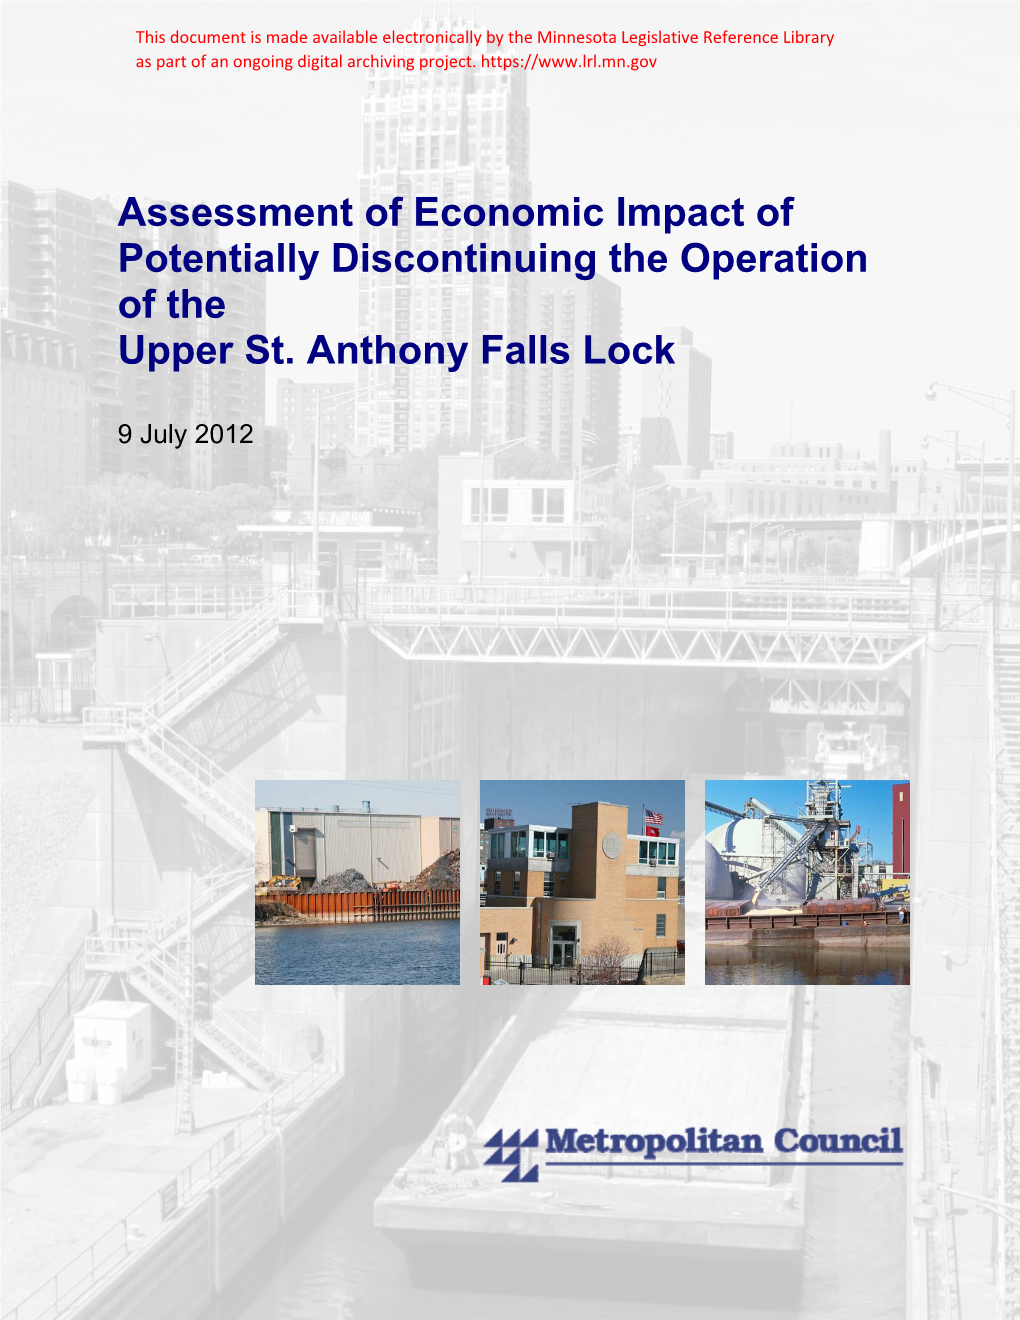 Assessment of Economic Impact of Potentially Discontinuing the Operation of the Upper St